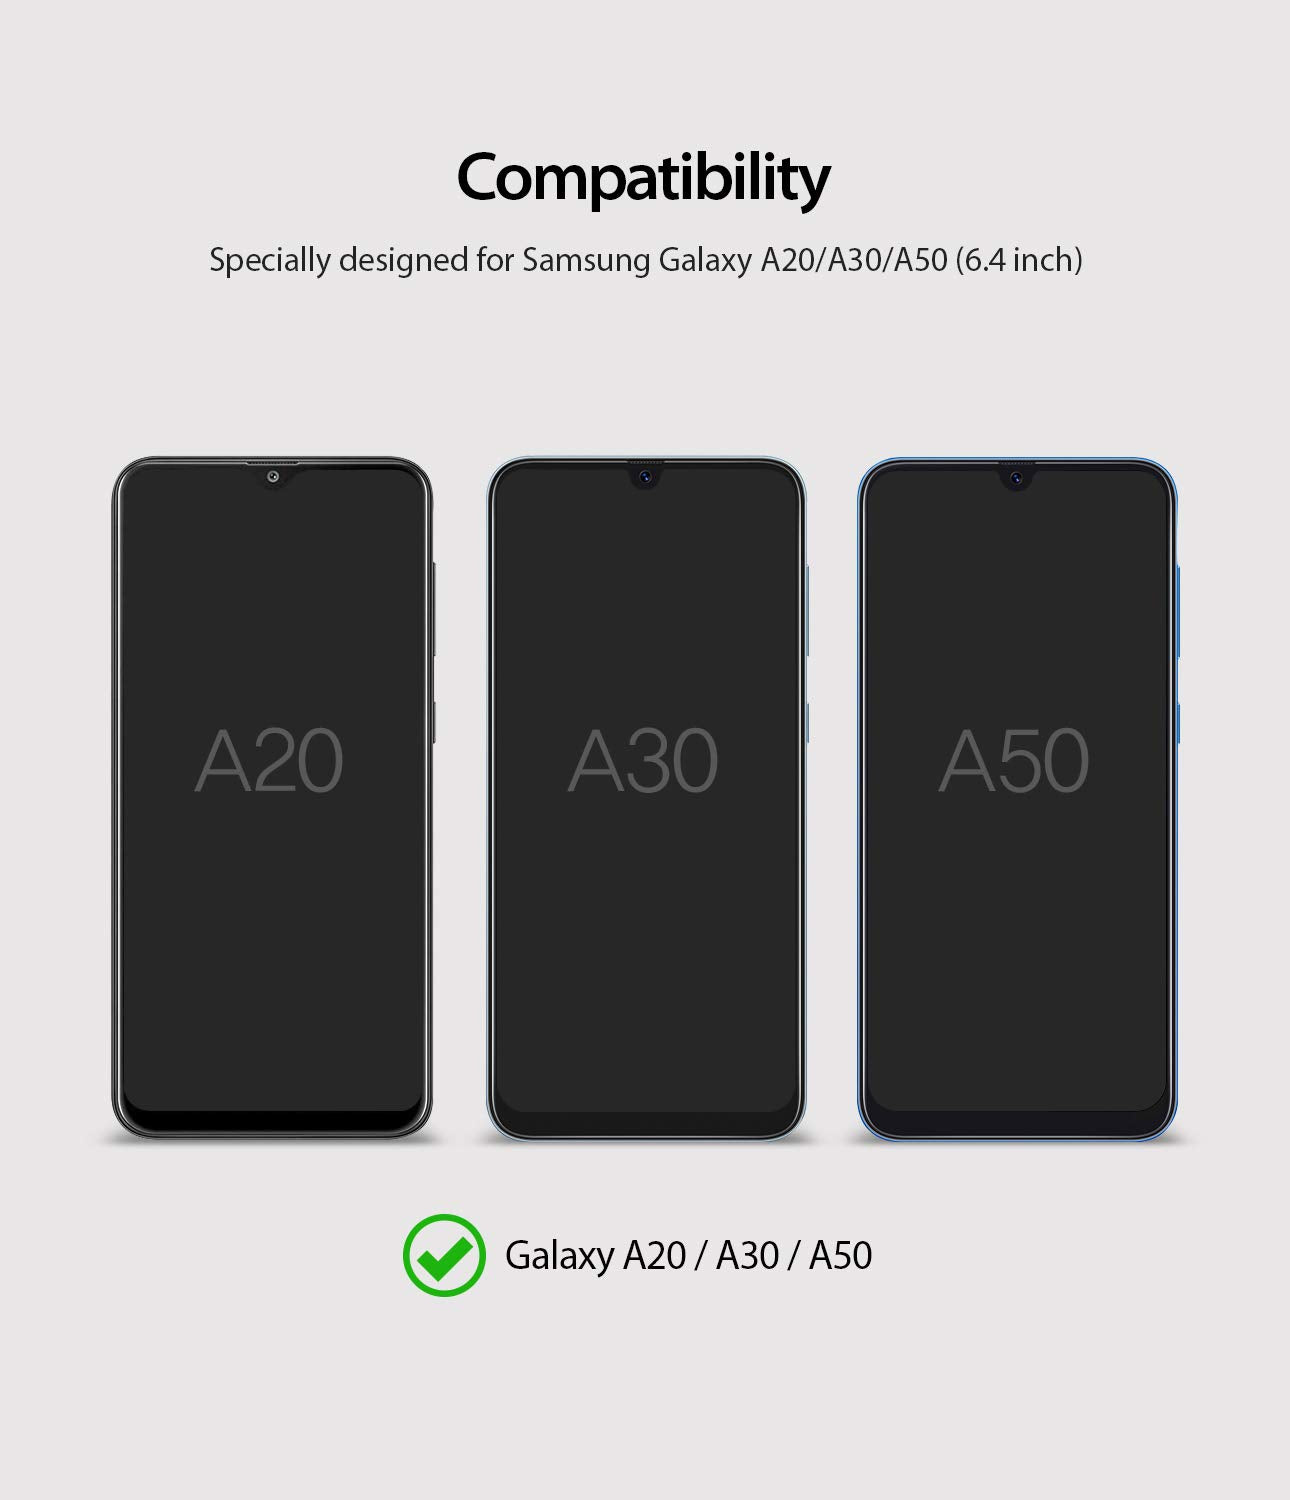 compatible with galaxy a20, a30, a50